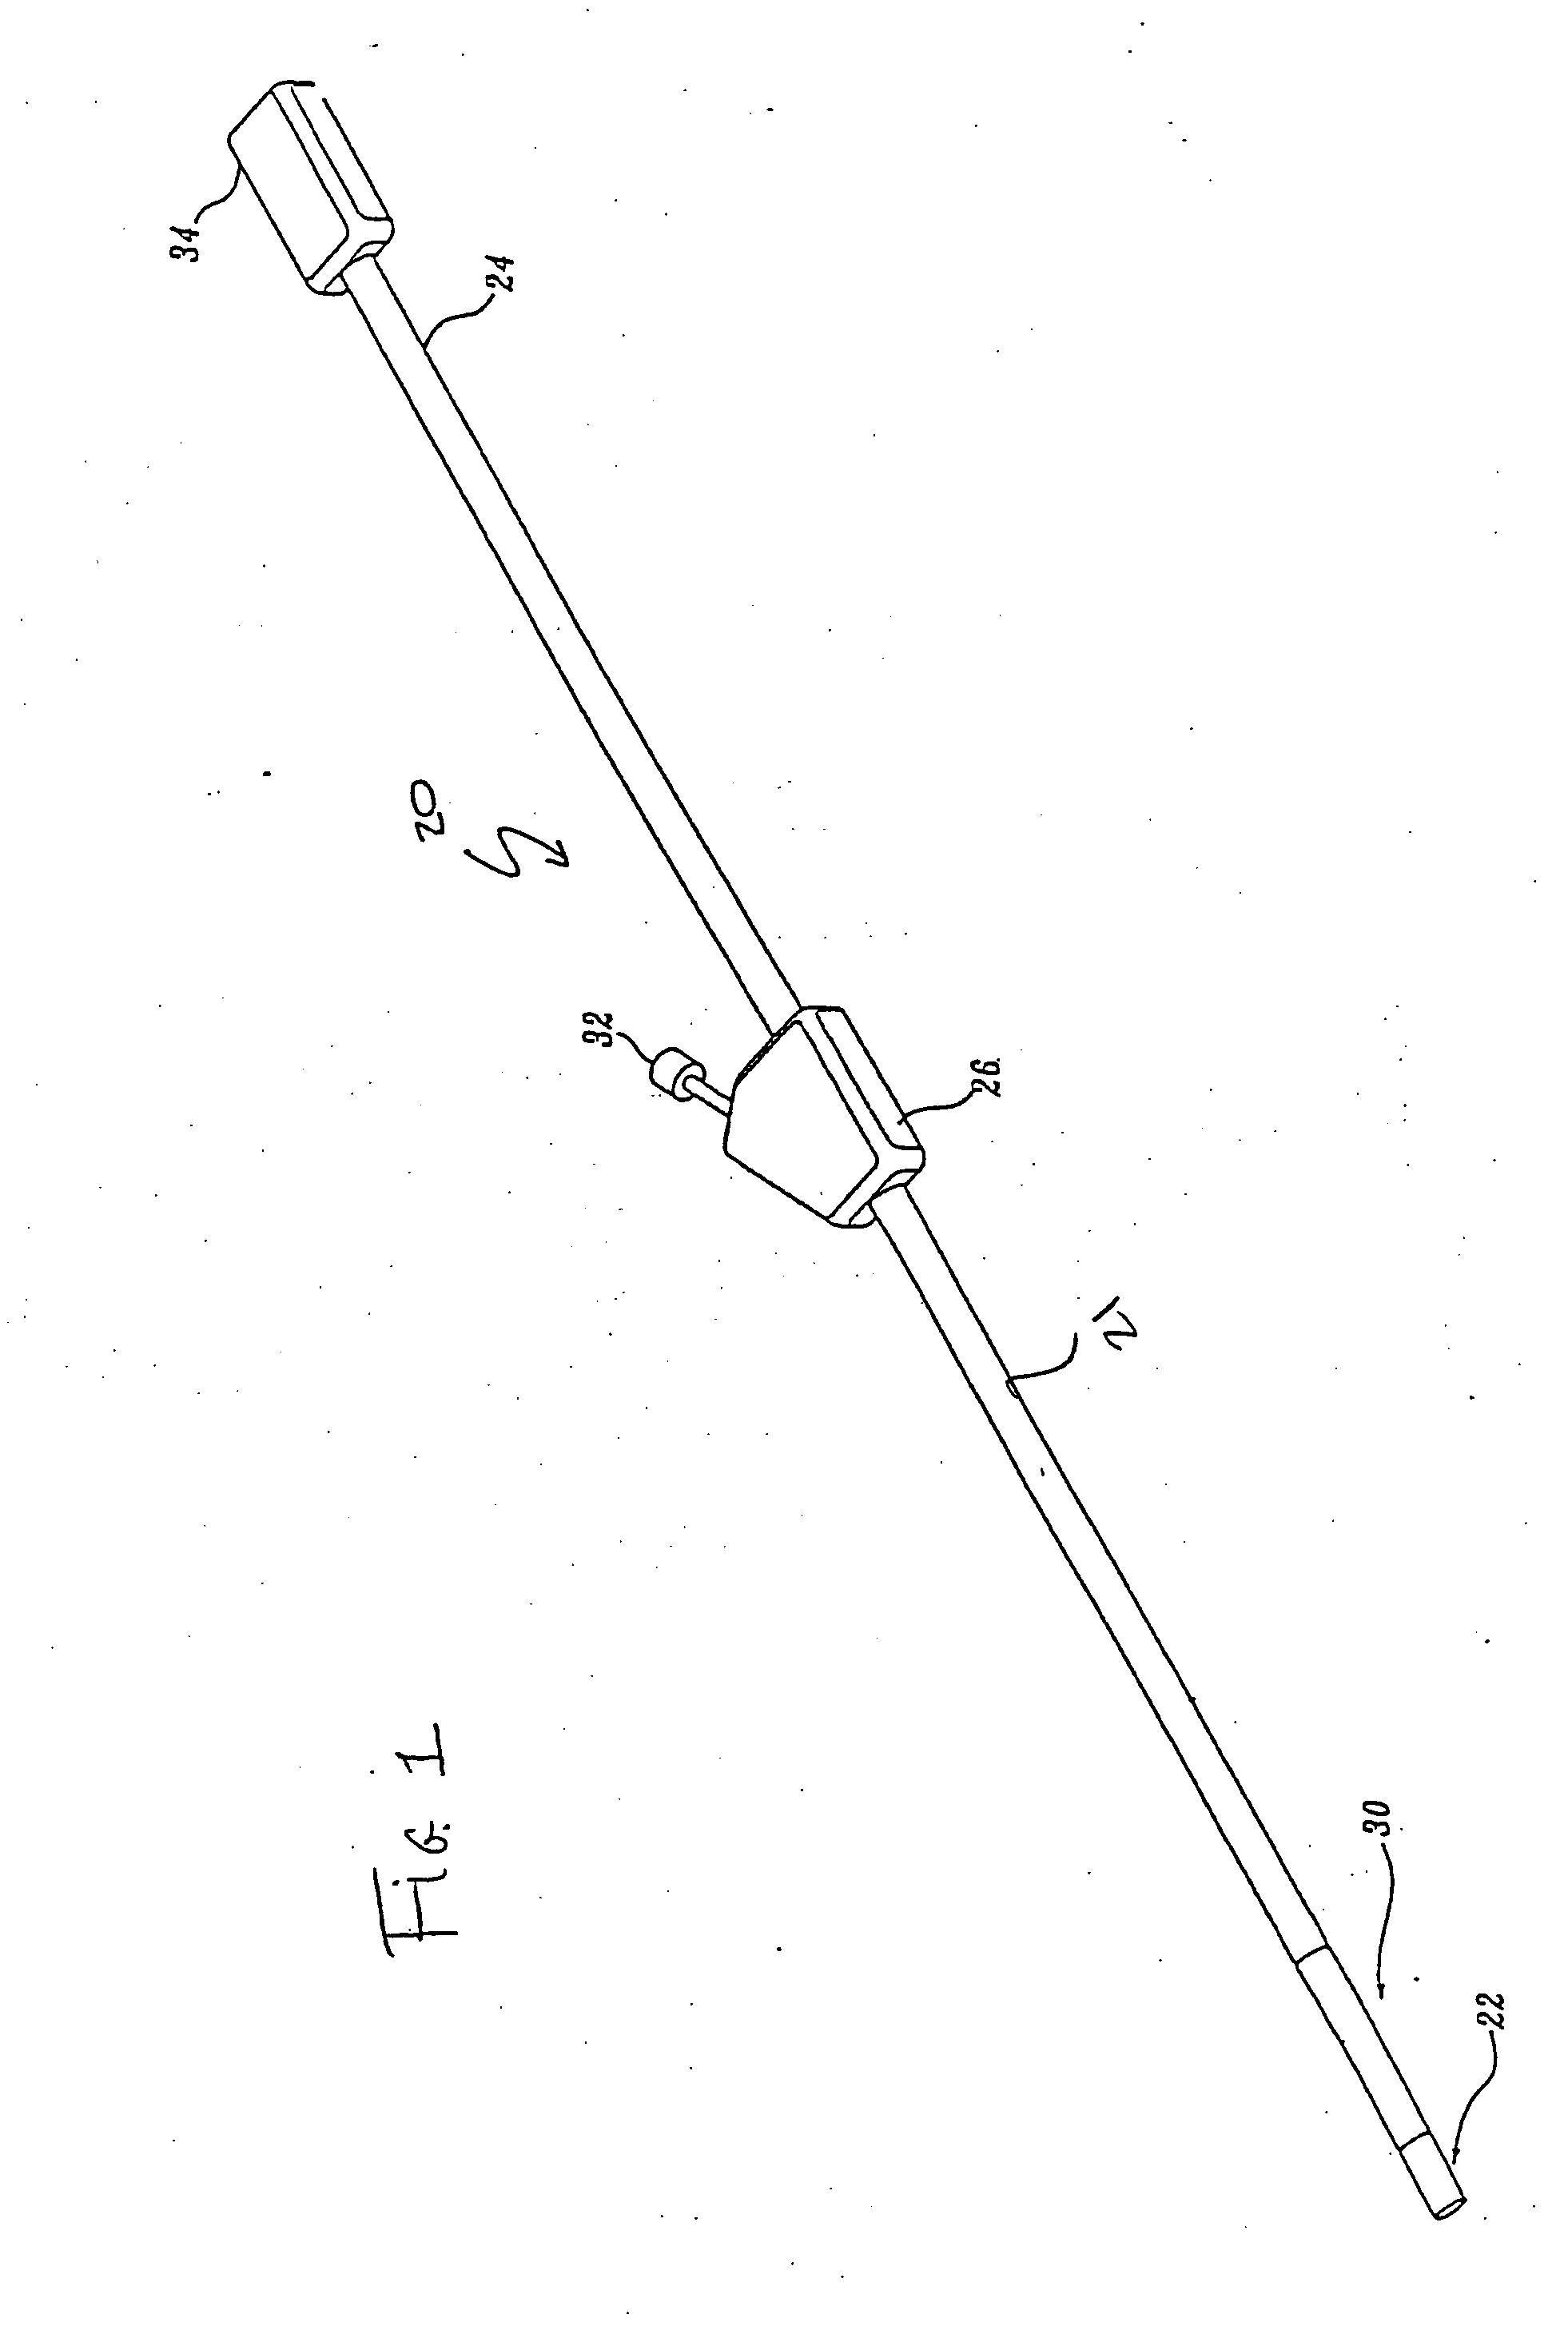 Method for forming an endoscope articulation joint